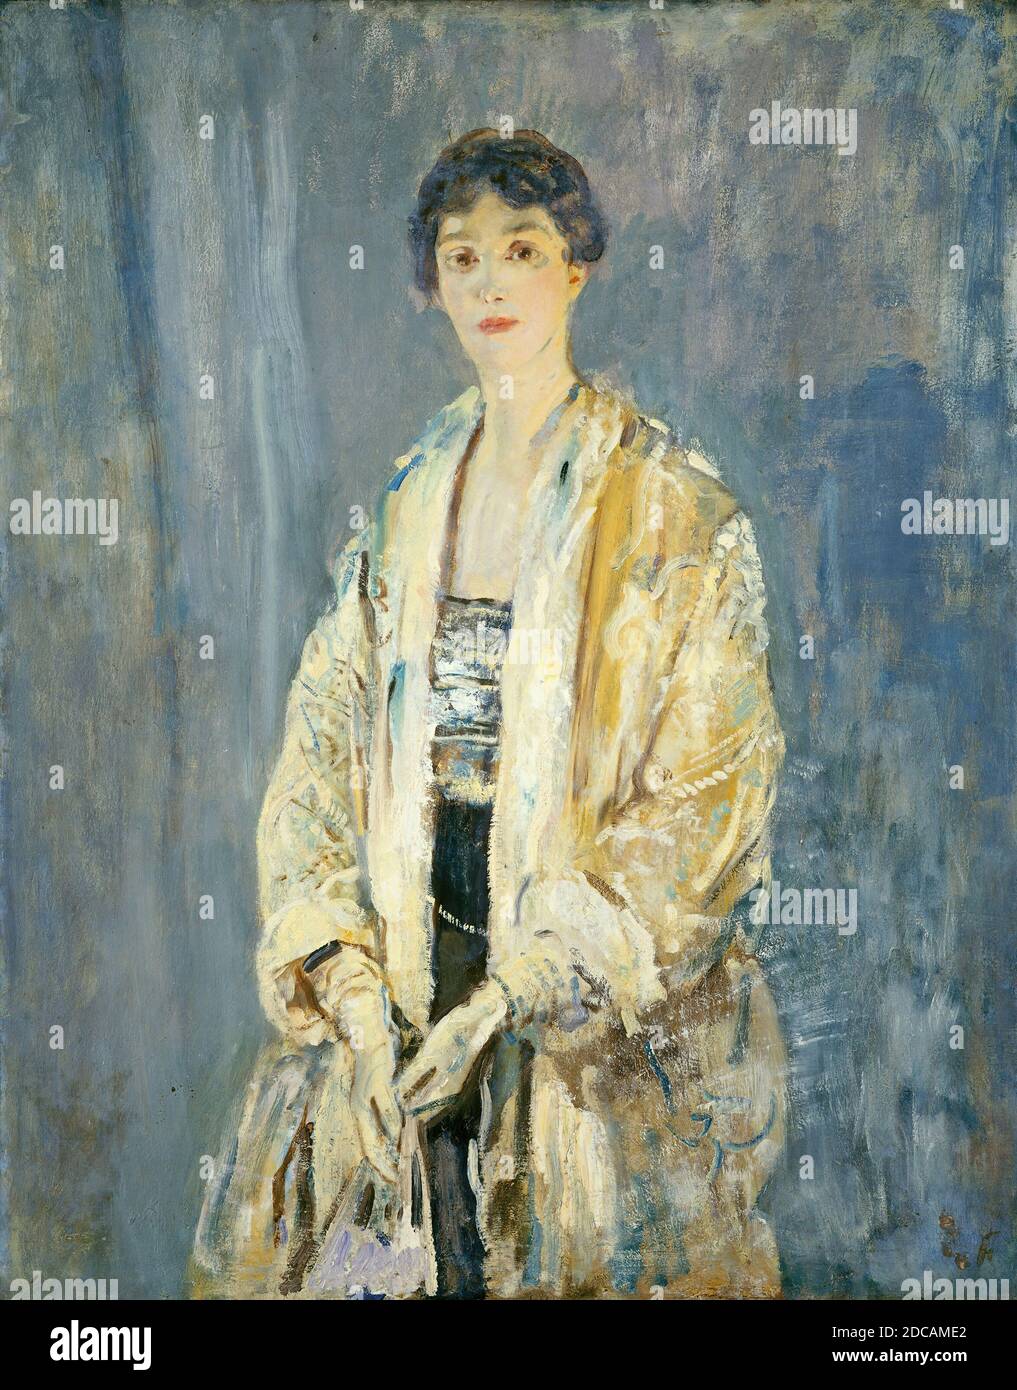 Ambrose McEvoy, (artist), British, 1878 - 1927, Mrs. Francis Howard, c. 1916/1918, oil on canvas, overall: 127 x 101.5 cm (50 x 39 15/16 in.), framed: 143.2 x 117.5 x 4.4 cm (56 3/8 x 46 1/4 x 1 3/4 in Stock Photo